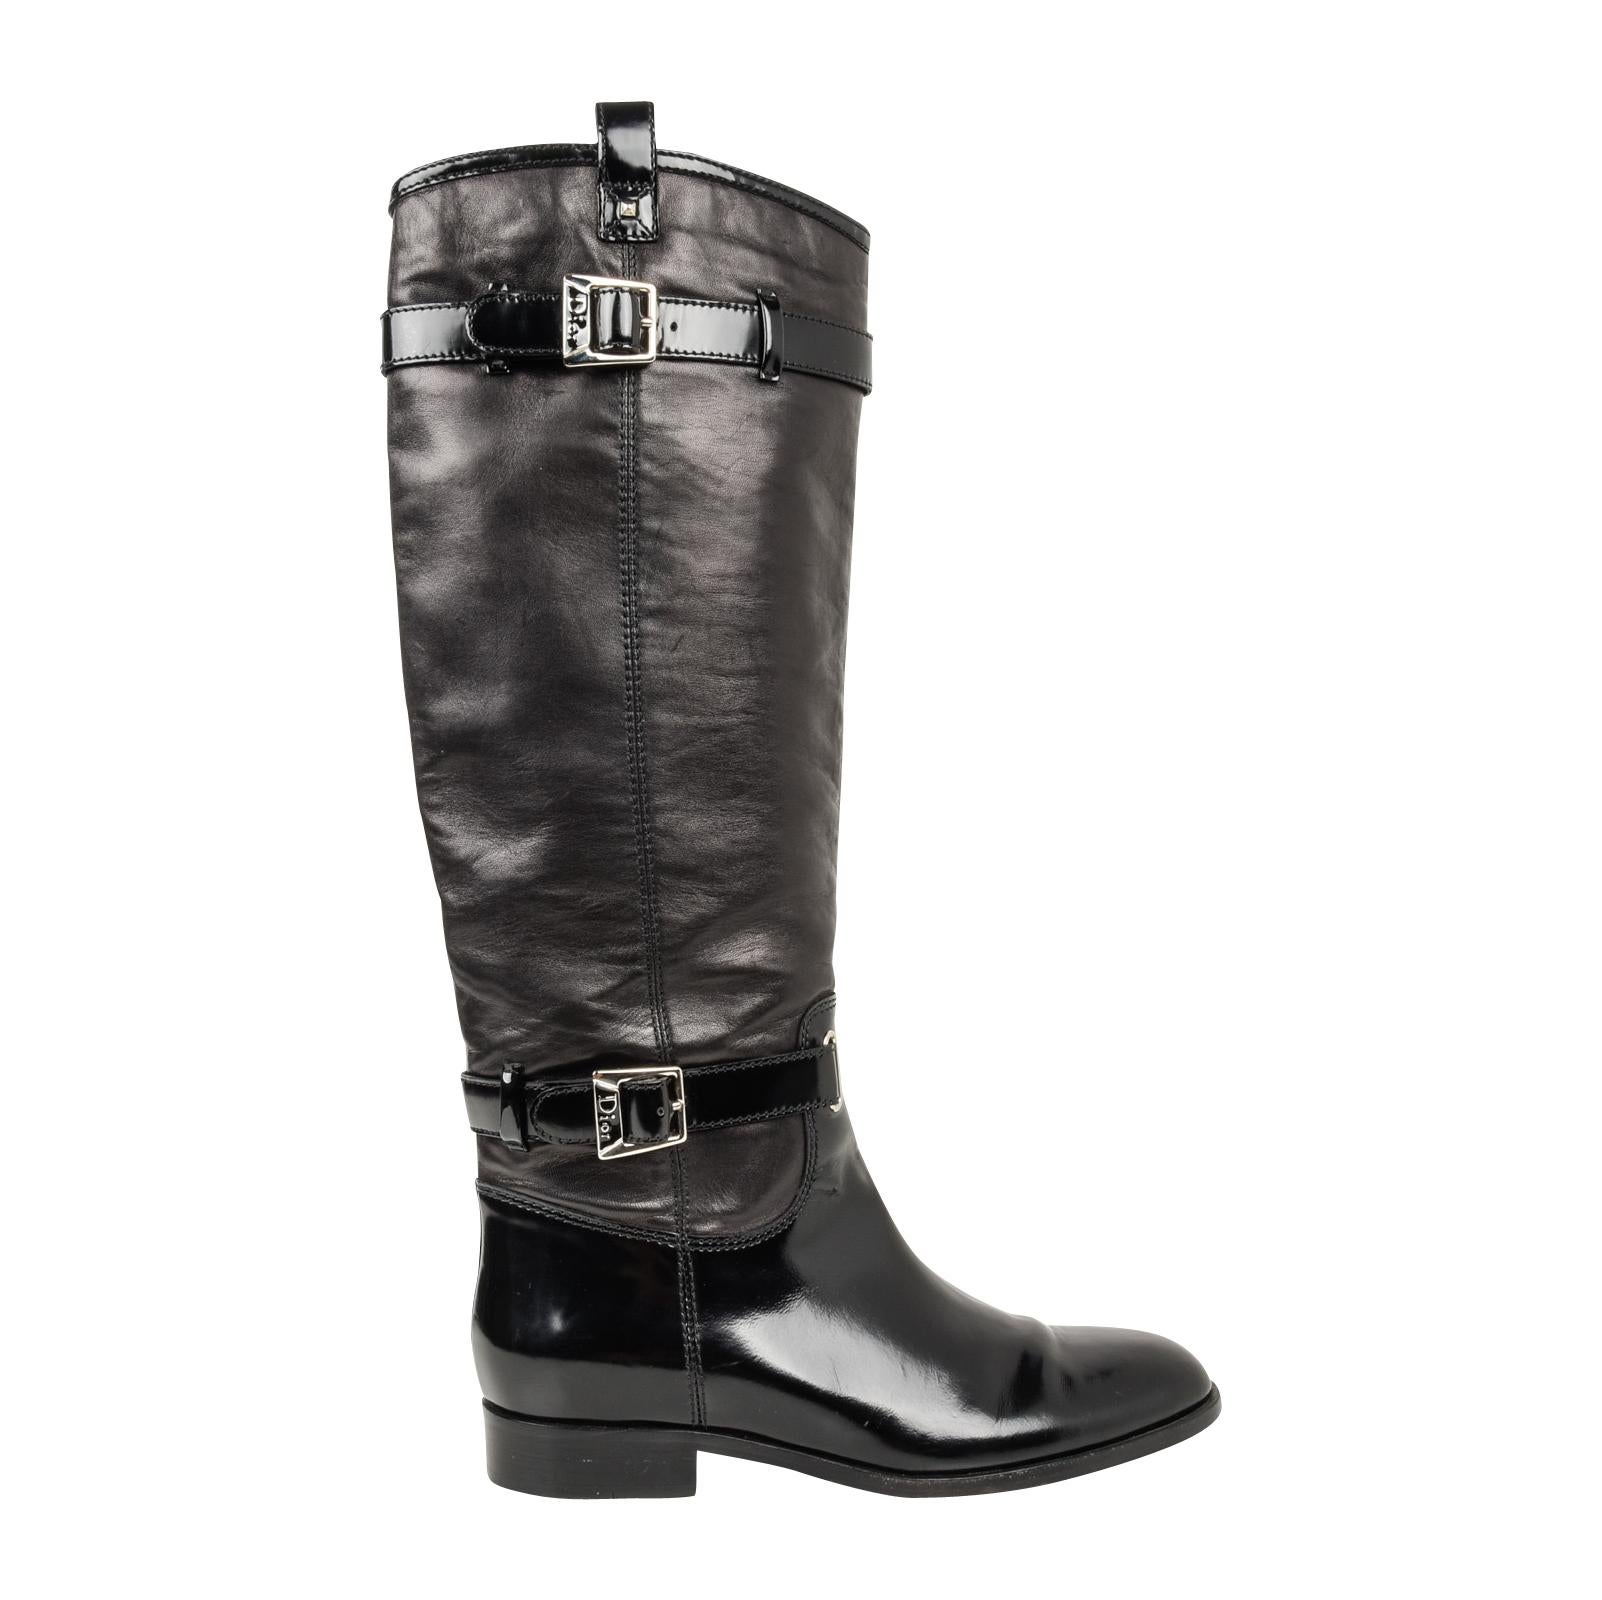 Guaranteed authentic Christian Dior black leather flat boot with straps around ankle and calf.
Riding style boots have smooth box calf on foot and straps and leather on calf.
Strap hardware is logo embossed. 
Boot pulls on. 
Minor natural wear